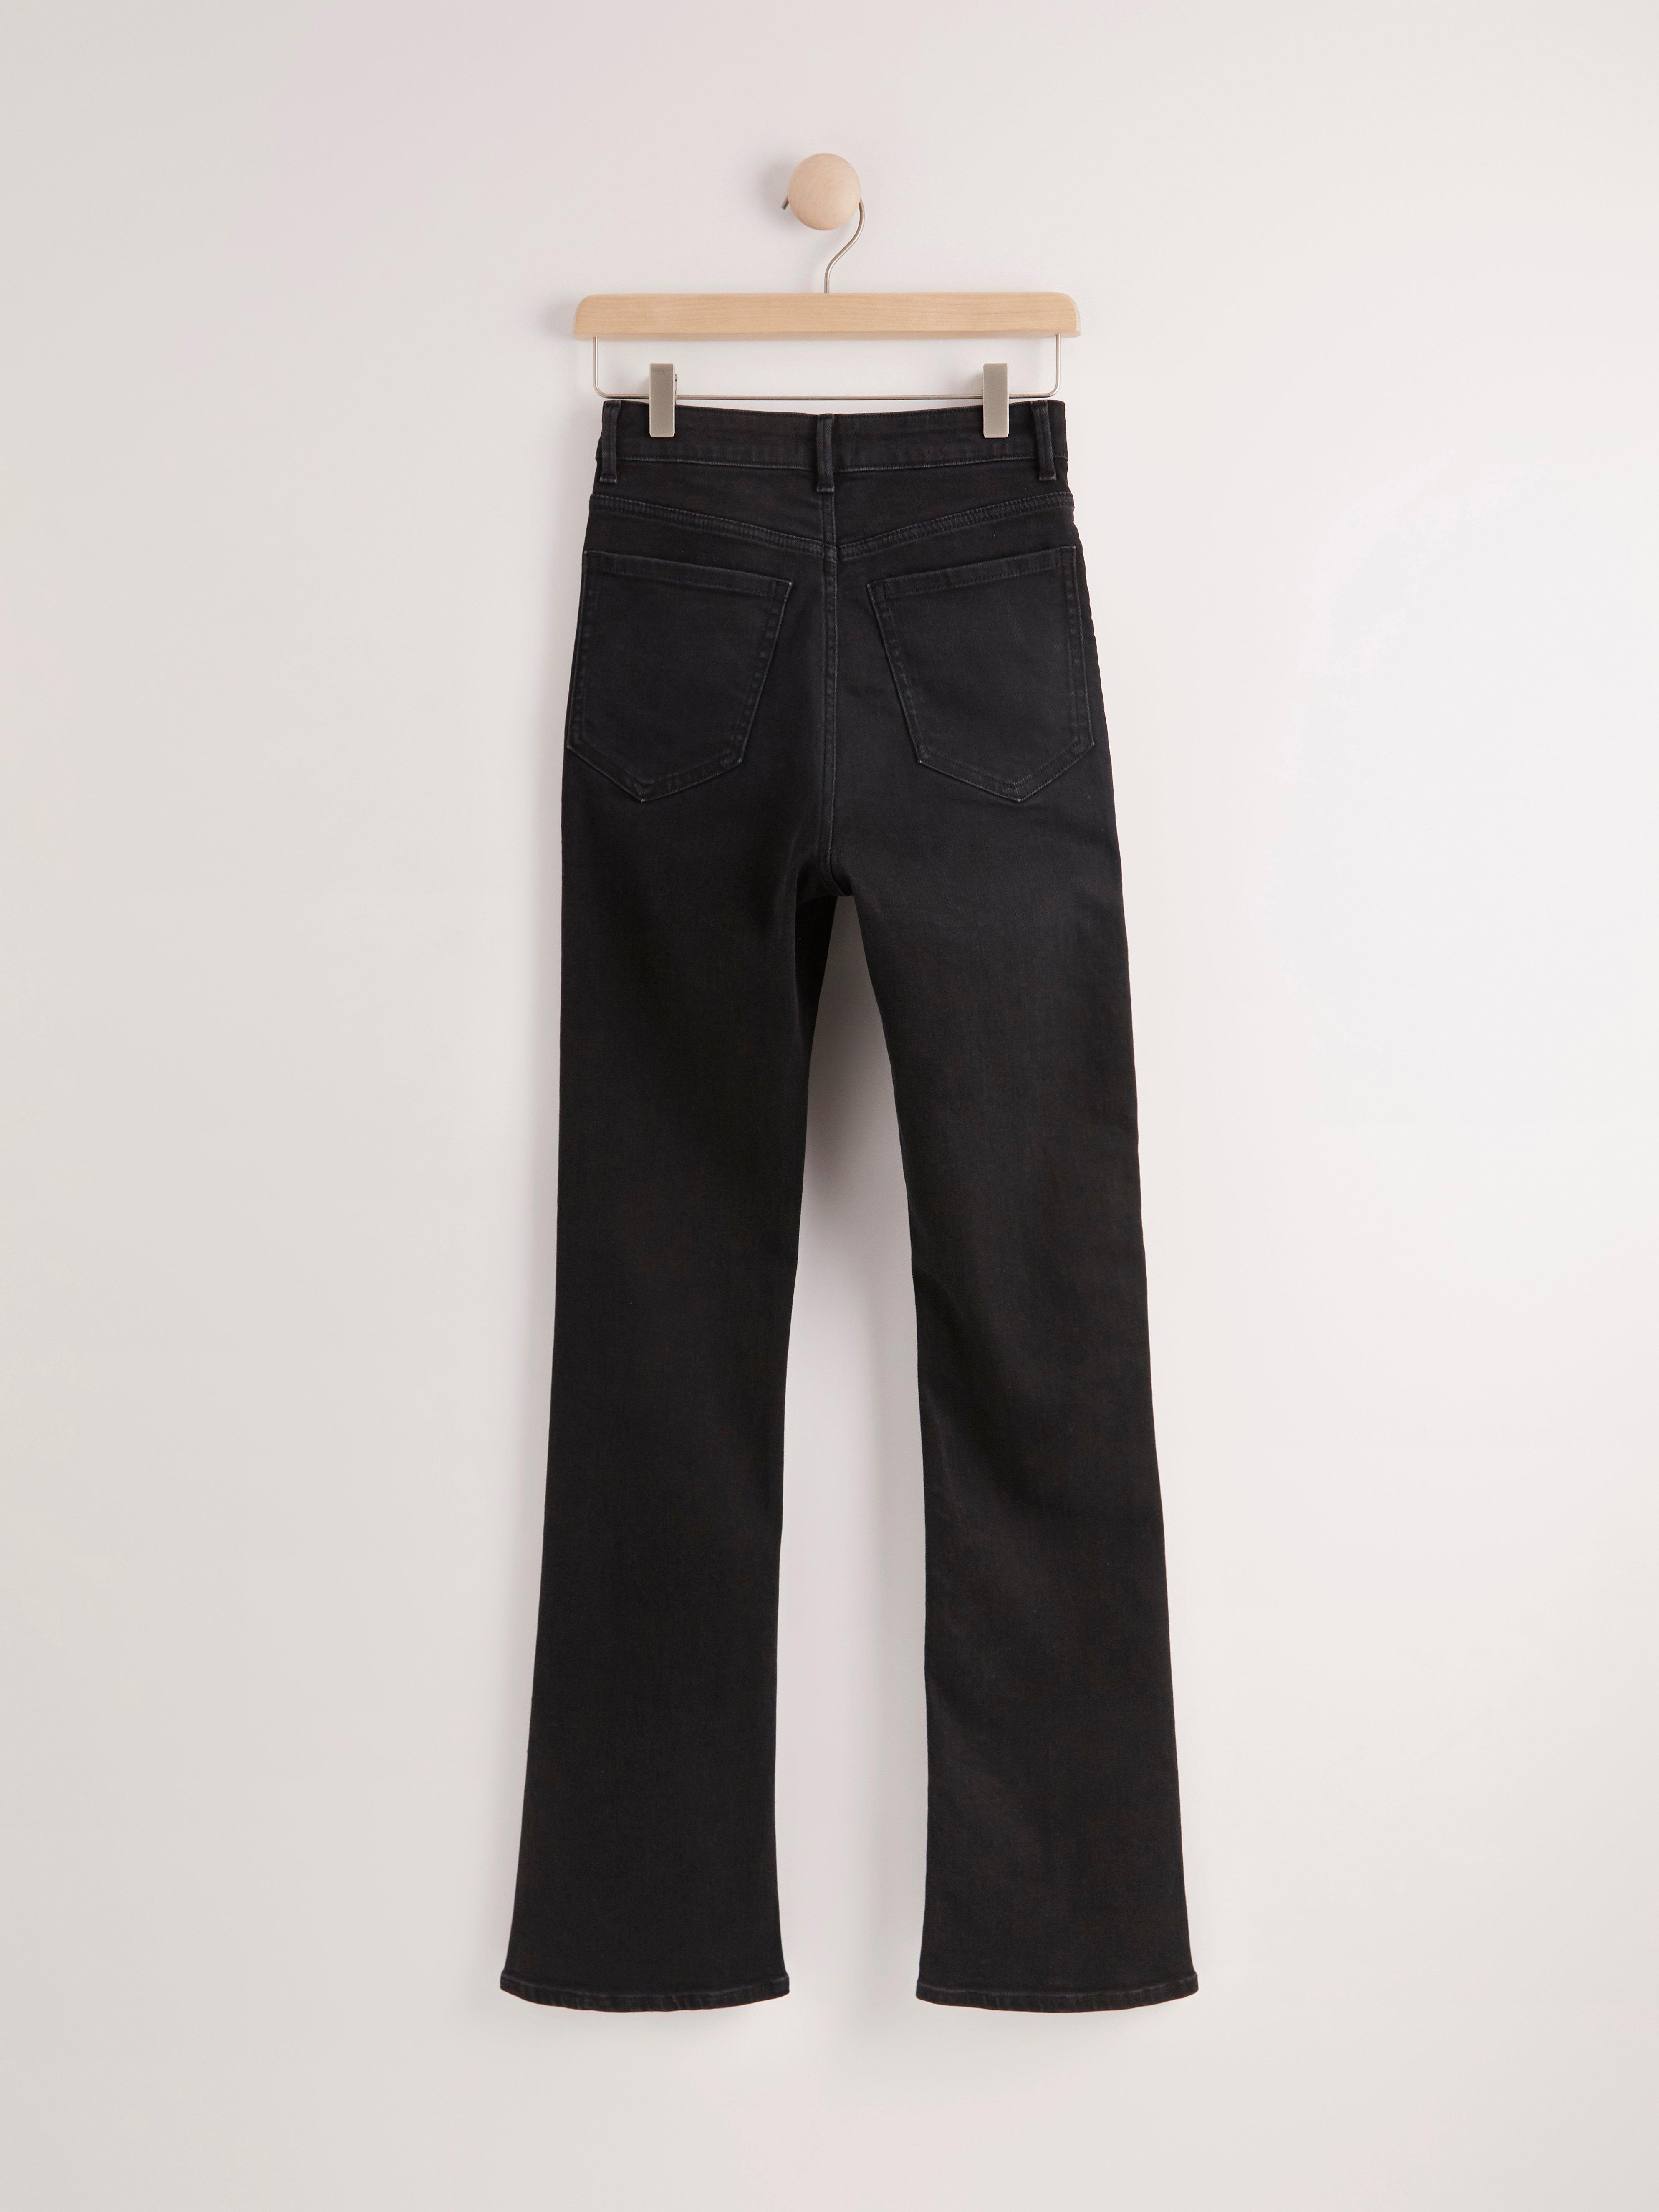 extra long high waisted jeans